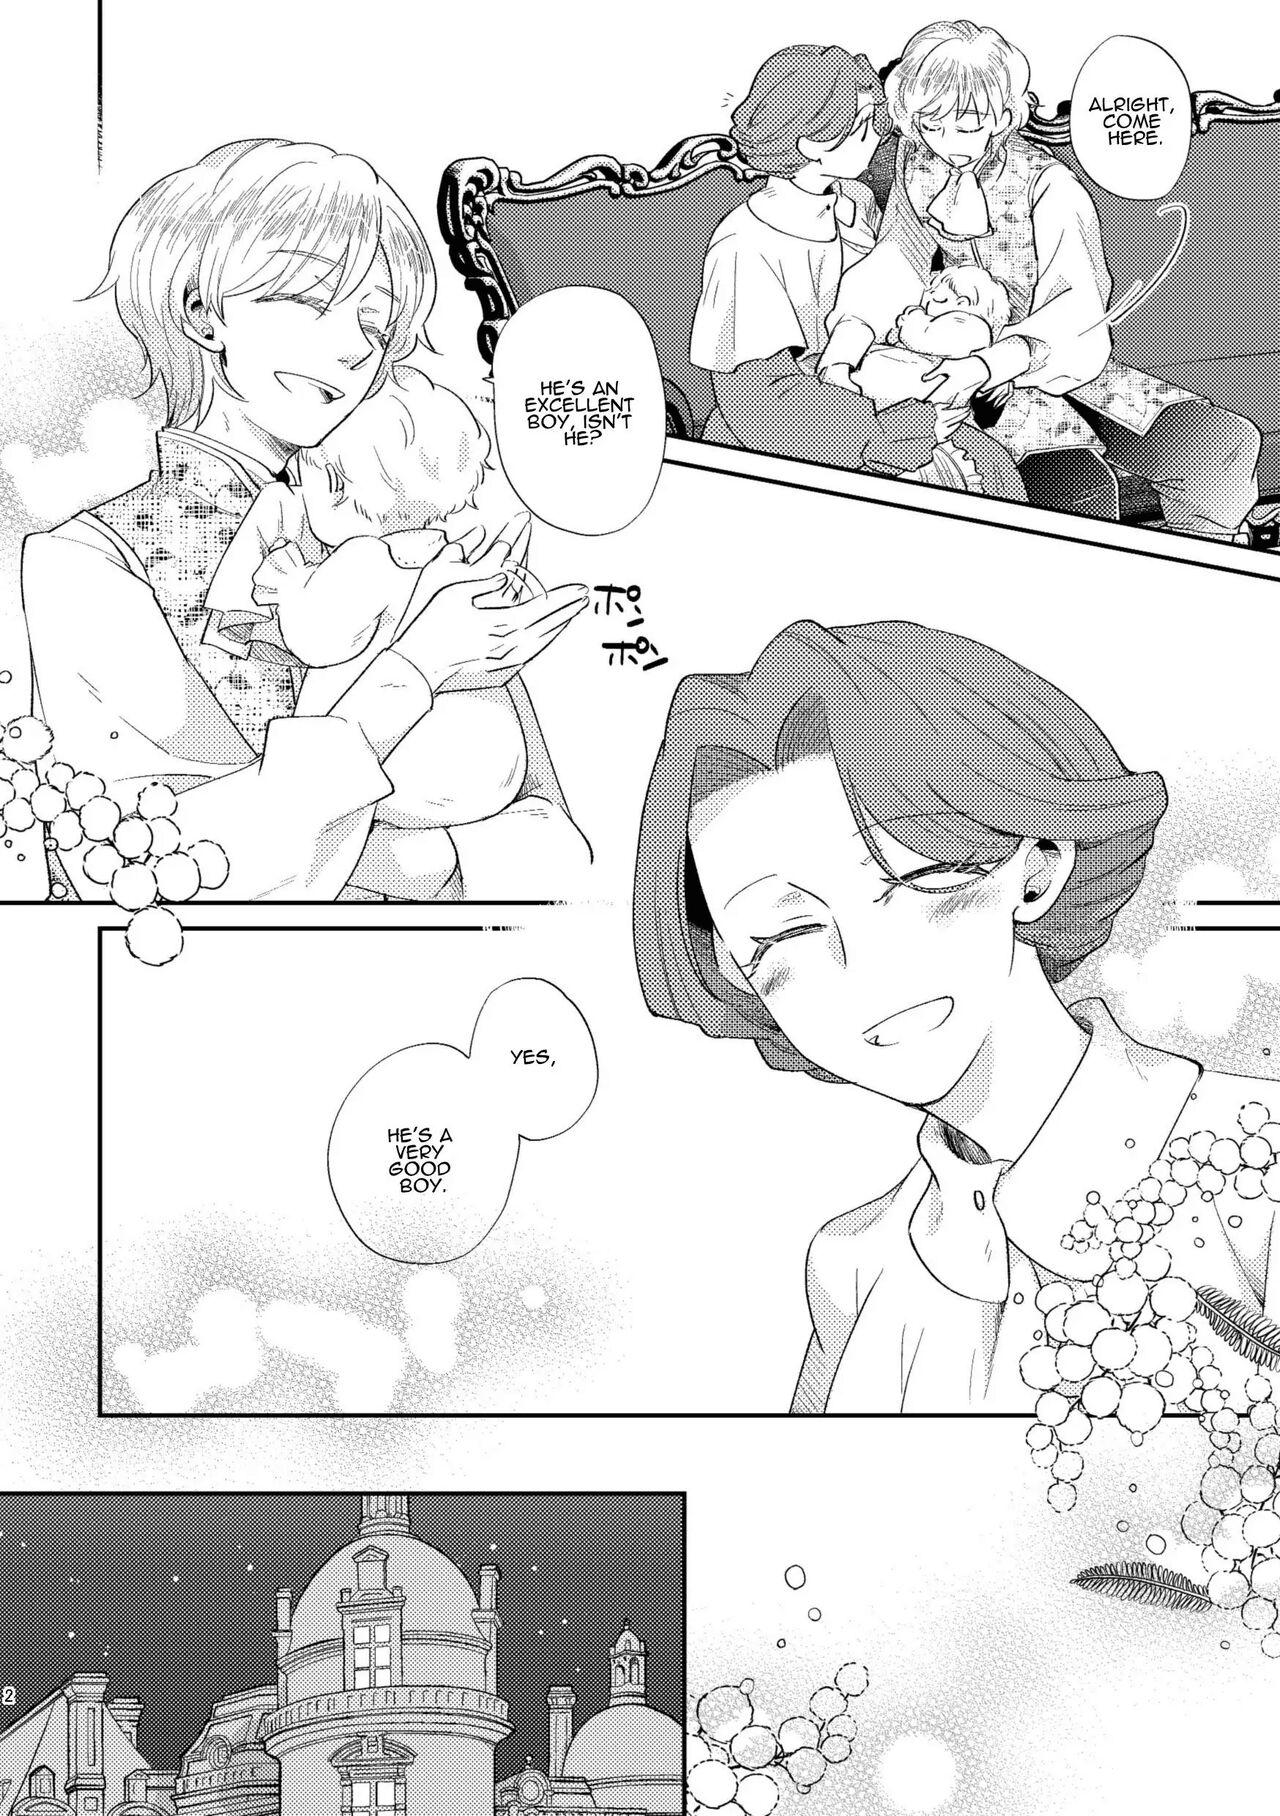 Leche Shounen Ou to Toshiue Ouhi EverAfter | The Boy King and His Older Queen EverAfter Wives - Page 4